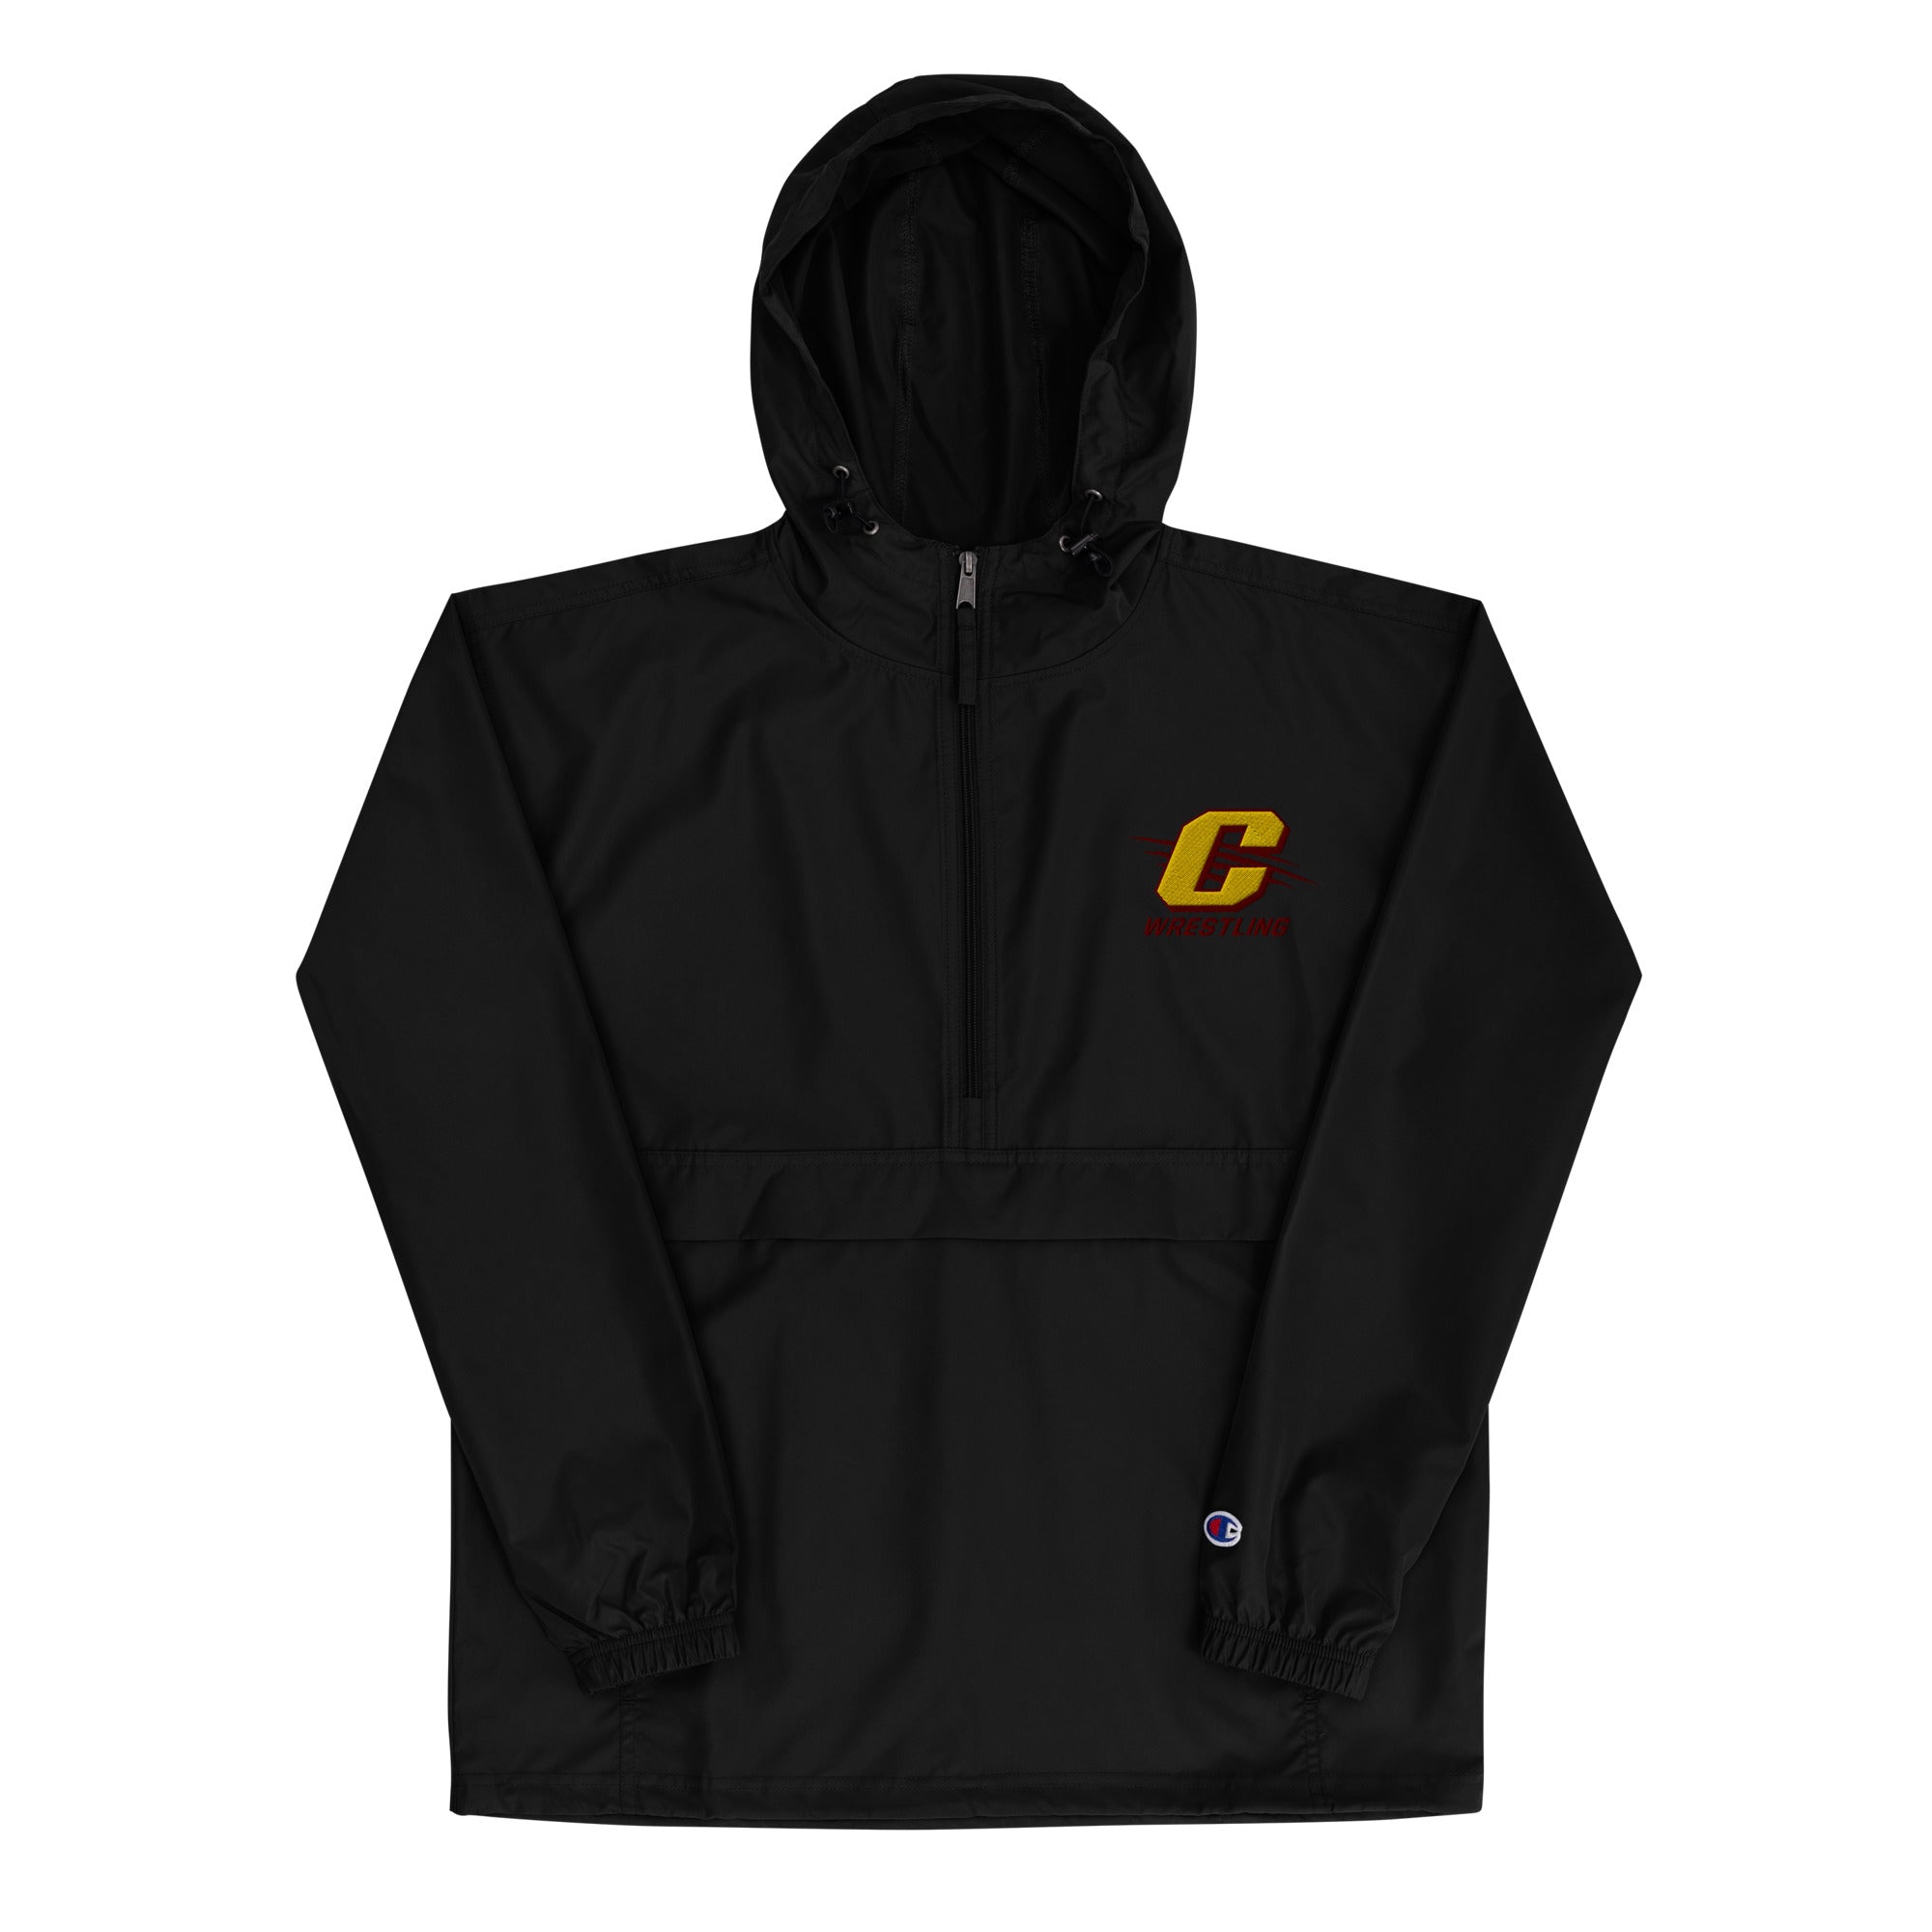 Cleveland High School Embroidered Champion Packable Jacket